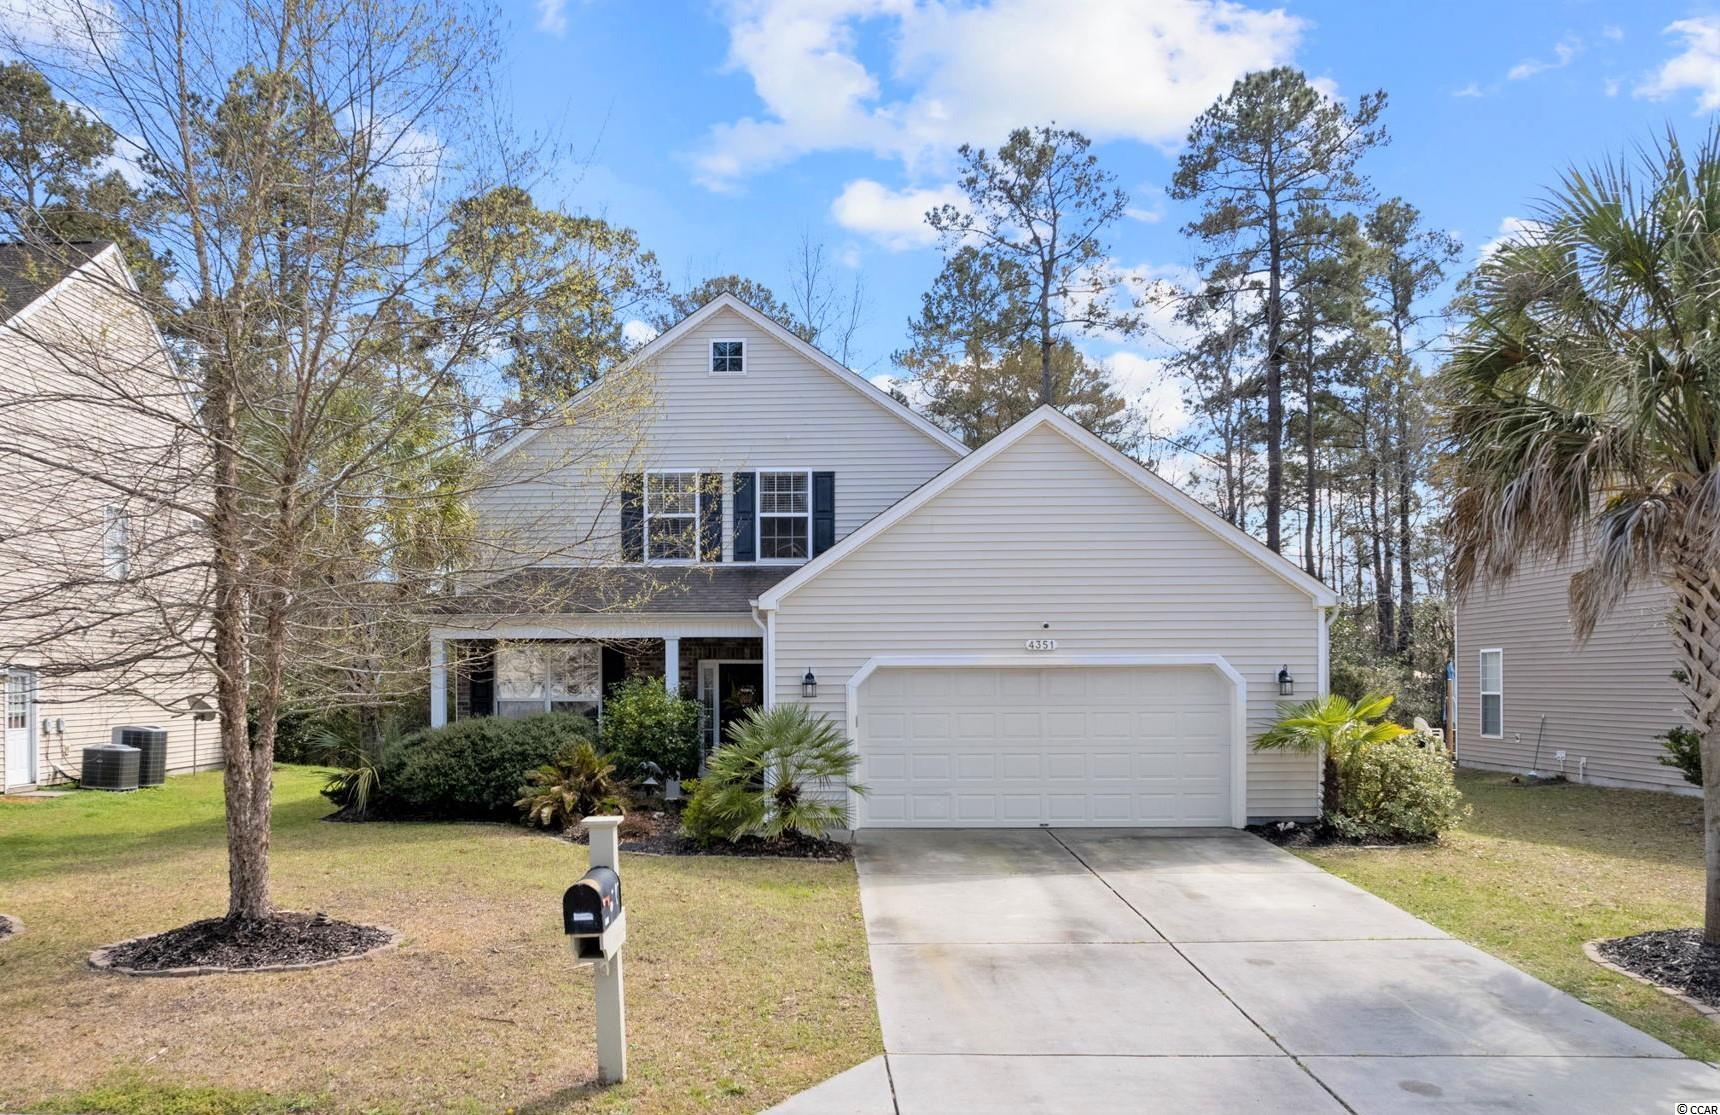 4351 Red Rooster Ln. Myrtle Beach, SC 29579